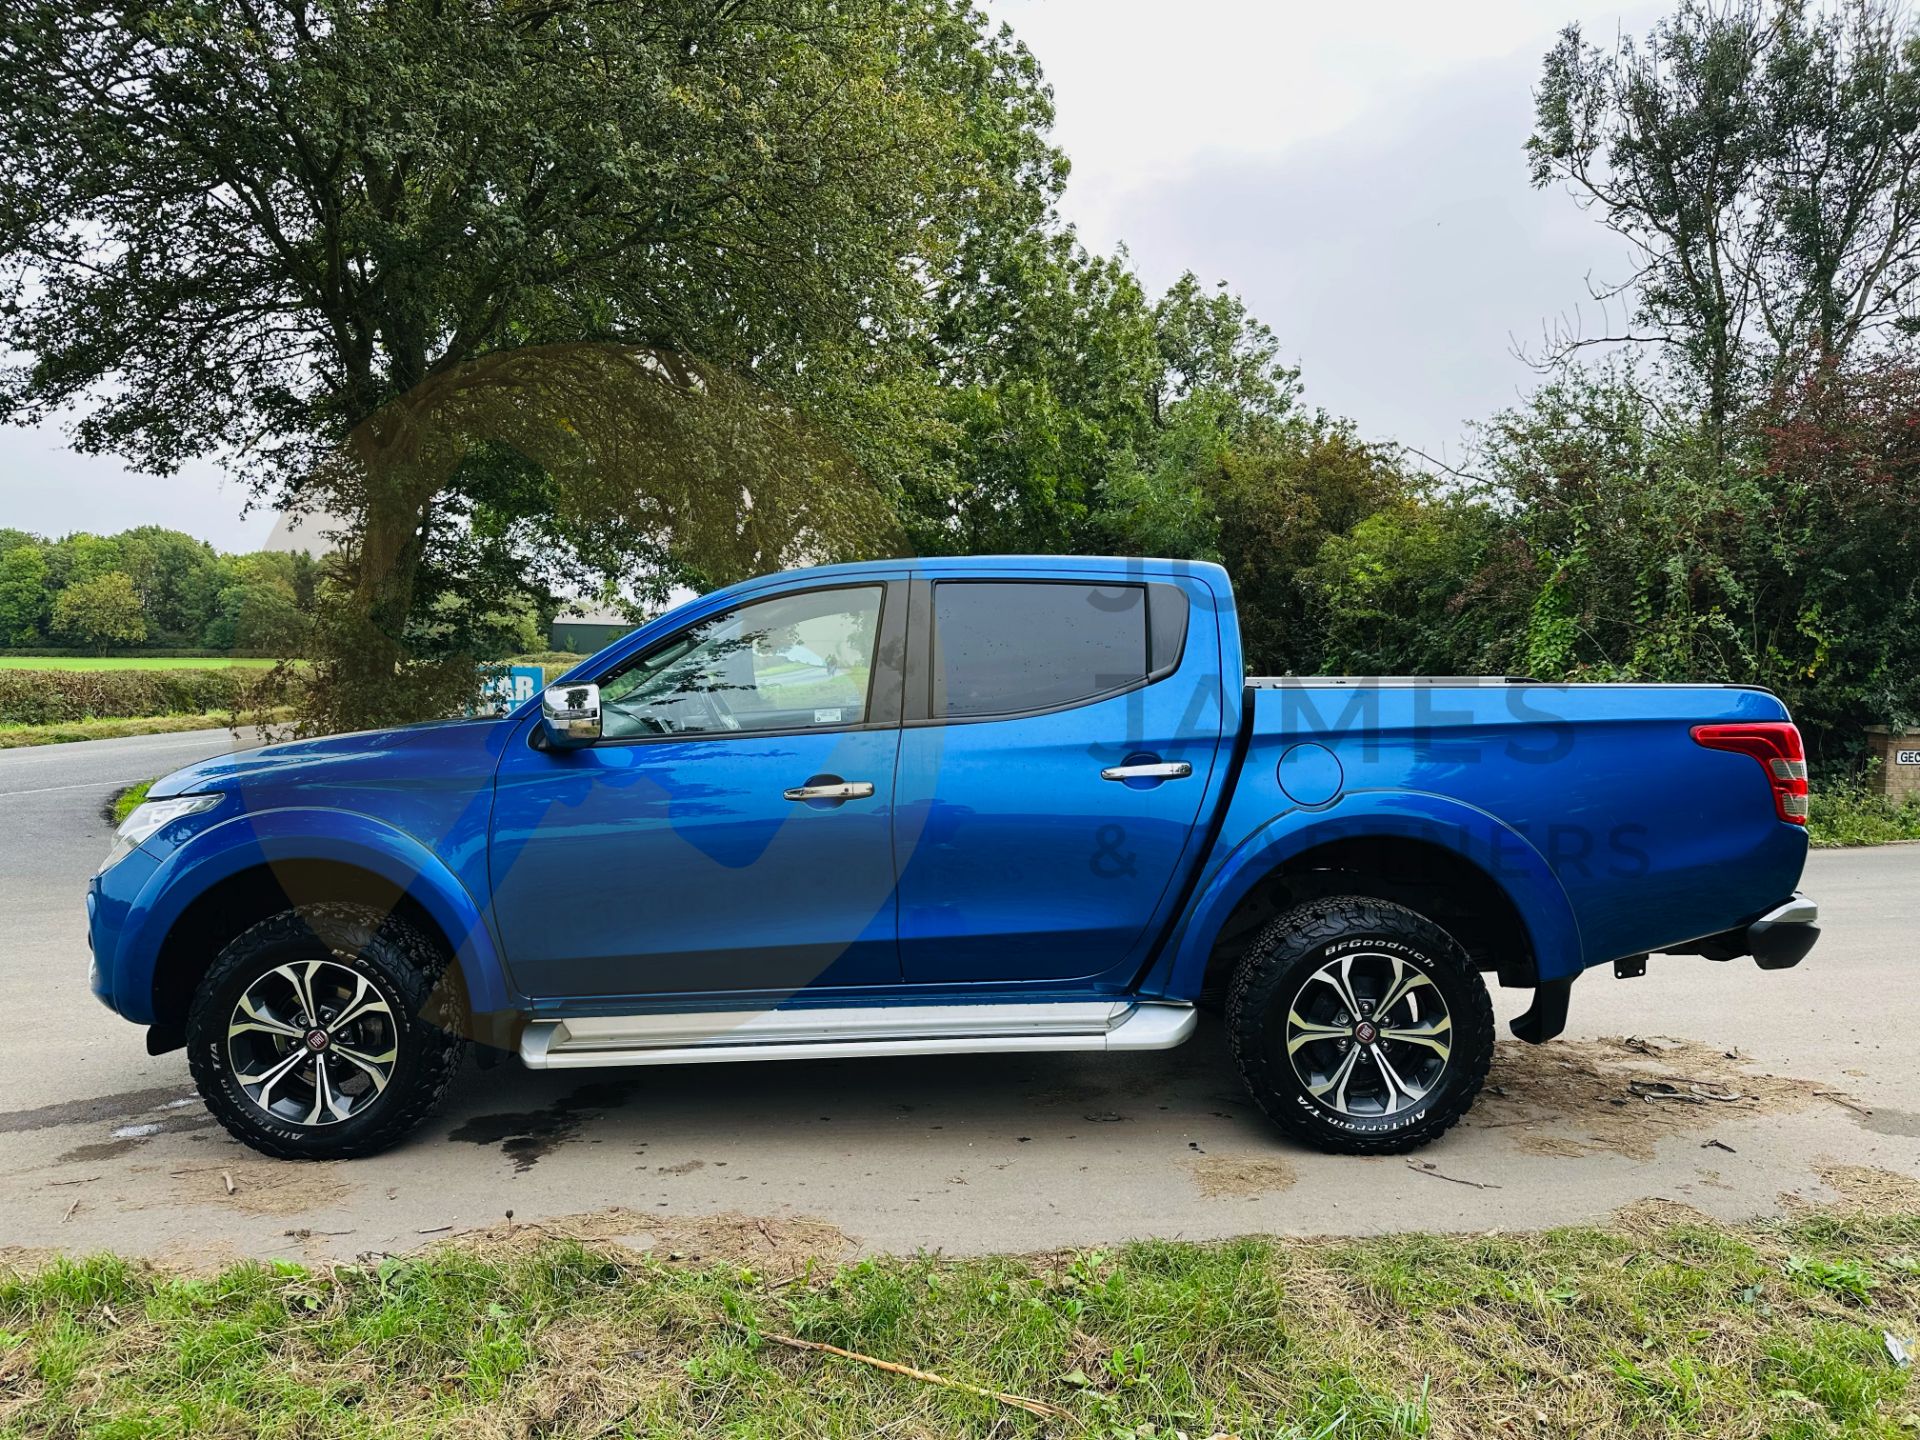 FIAT FULLBACK *LX* DOUBLE CAB PICK-UP (2018-EURO 6) 2.4 DIESEL - AUTO STOP/START *SAT NAV* (1 OWNER) - Image 6 of 31